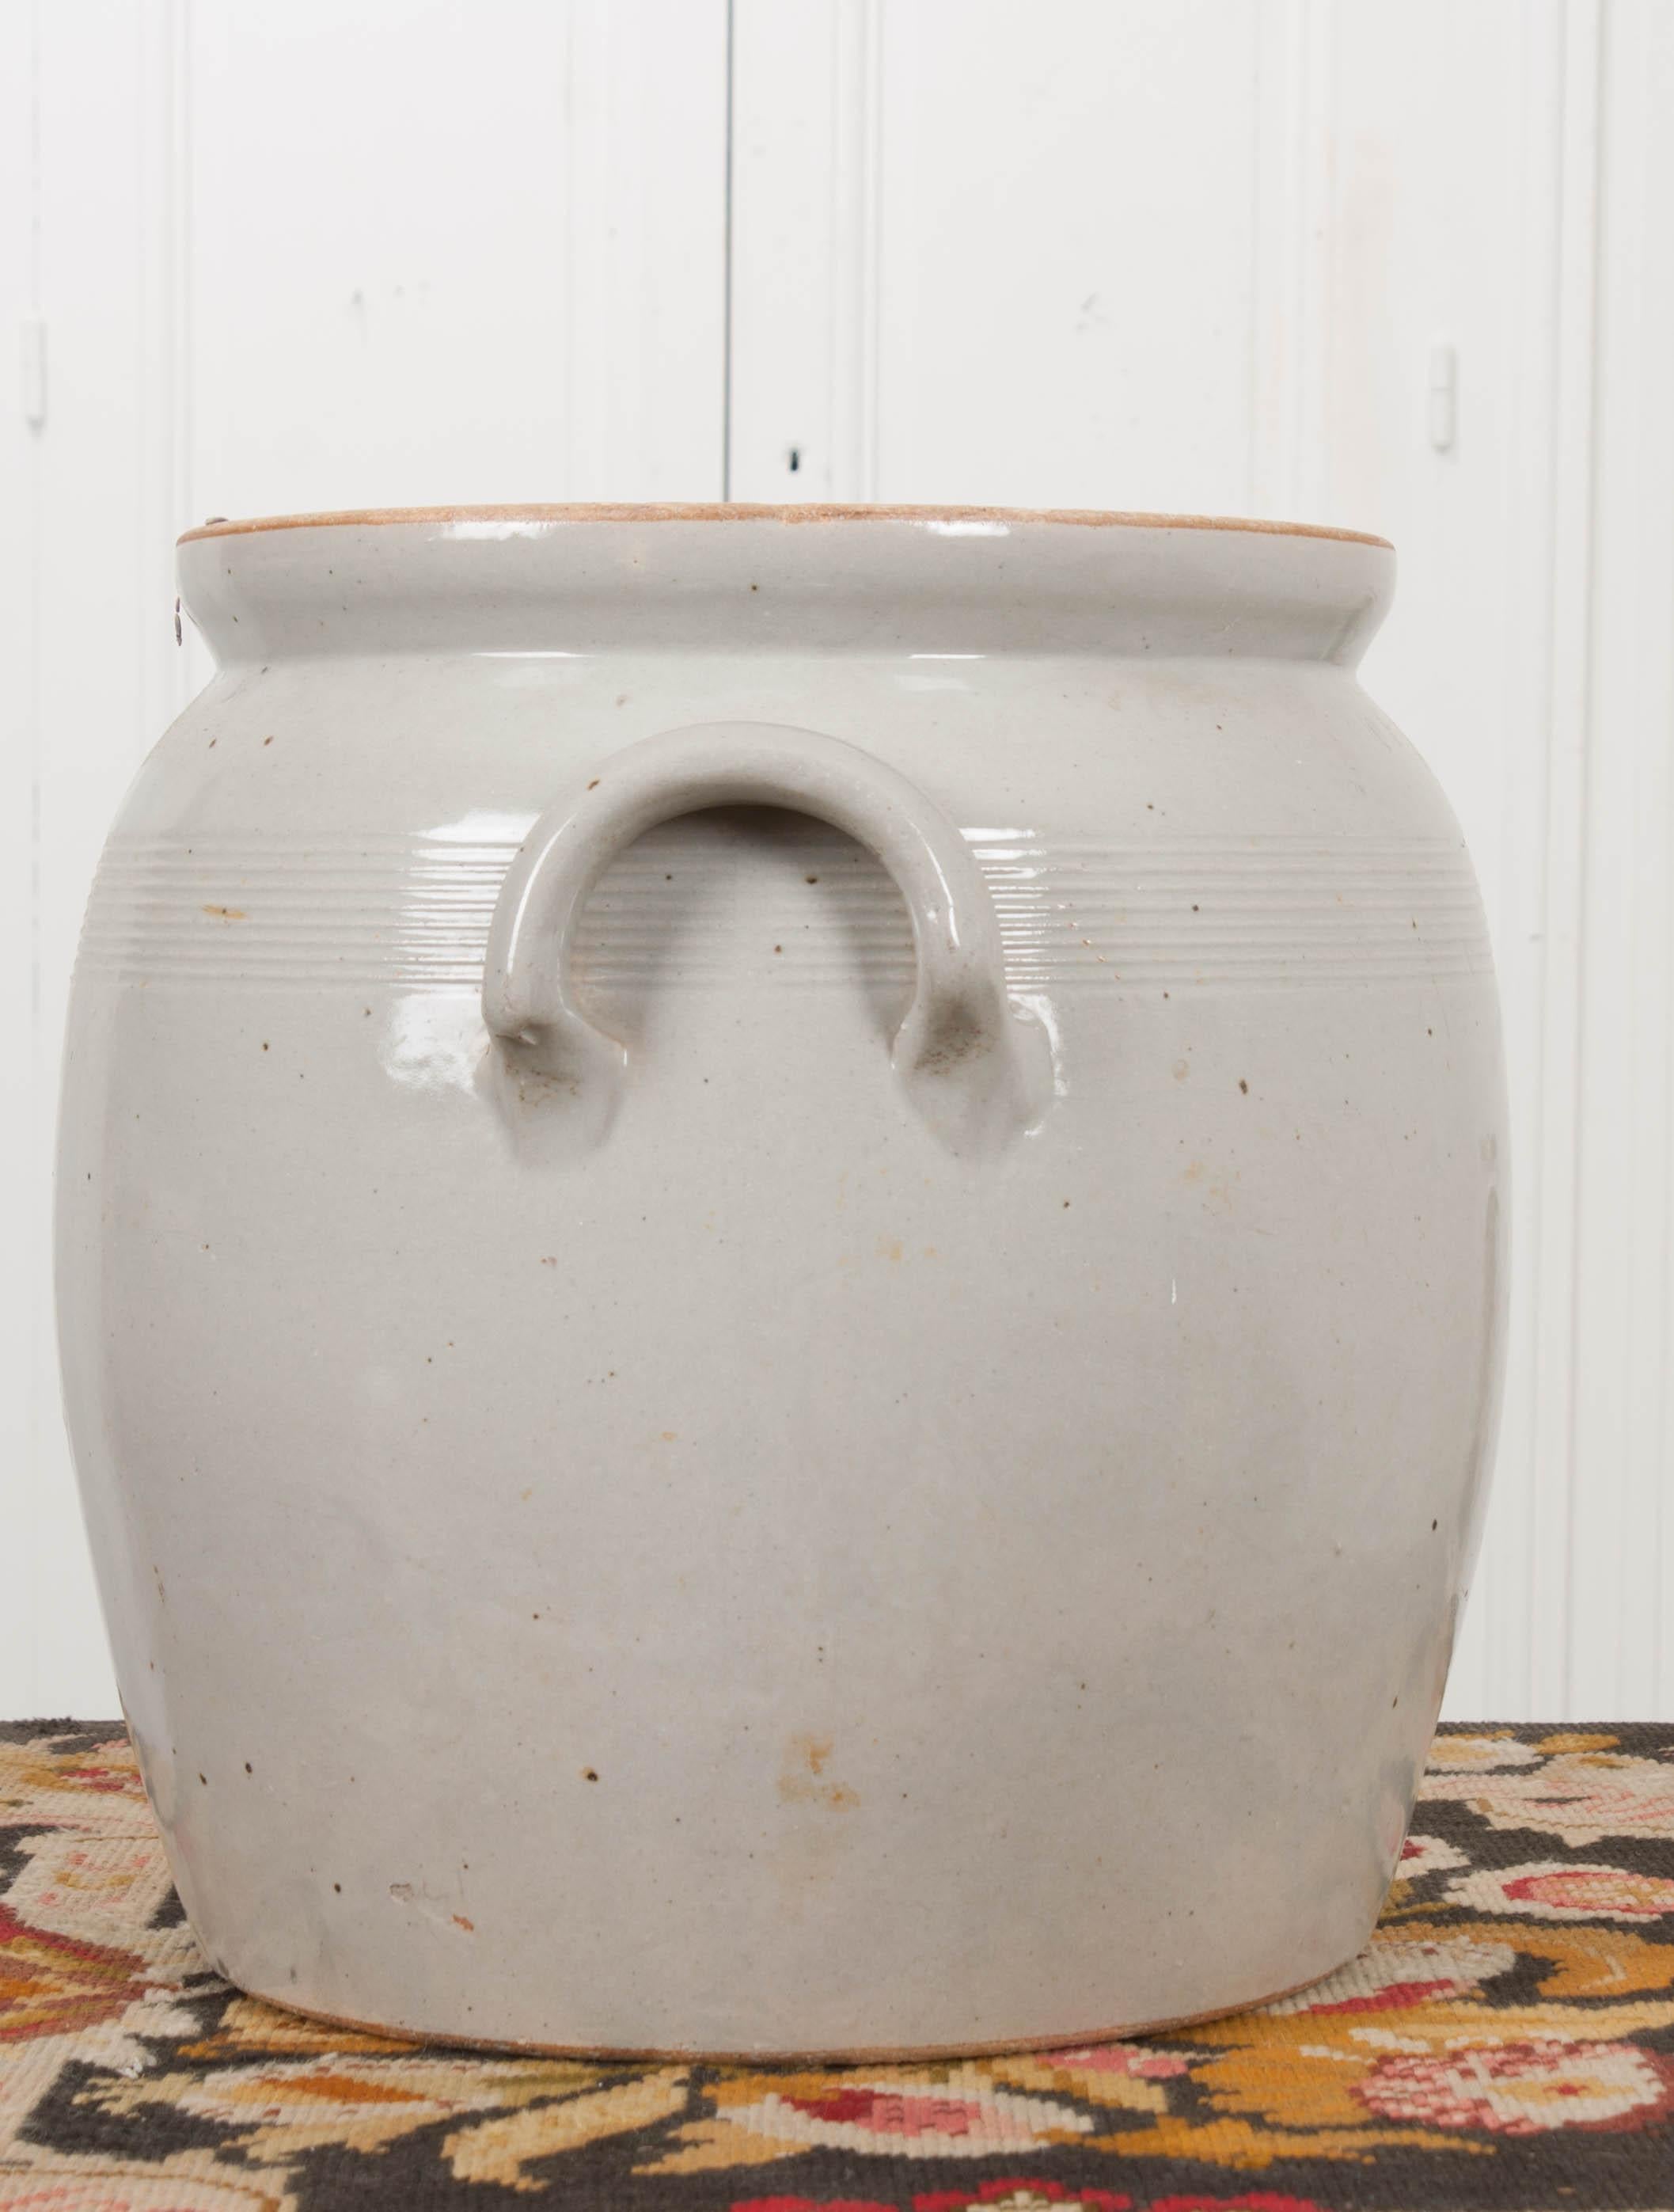 This vintage Provincial ecru-glazed earthenware two-handled crock, circa 1930s is from France and would be perfect for displaying dried flowers or with a collection of other crockery.